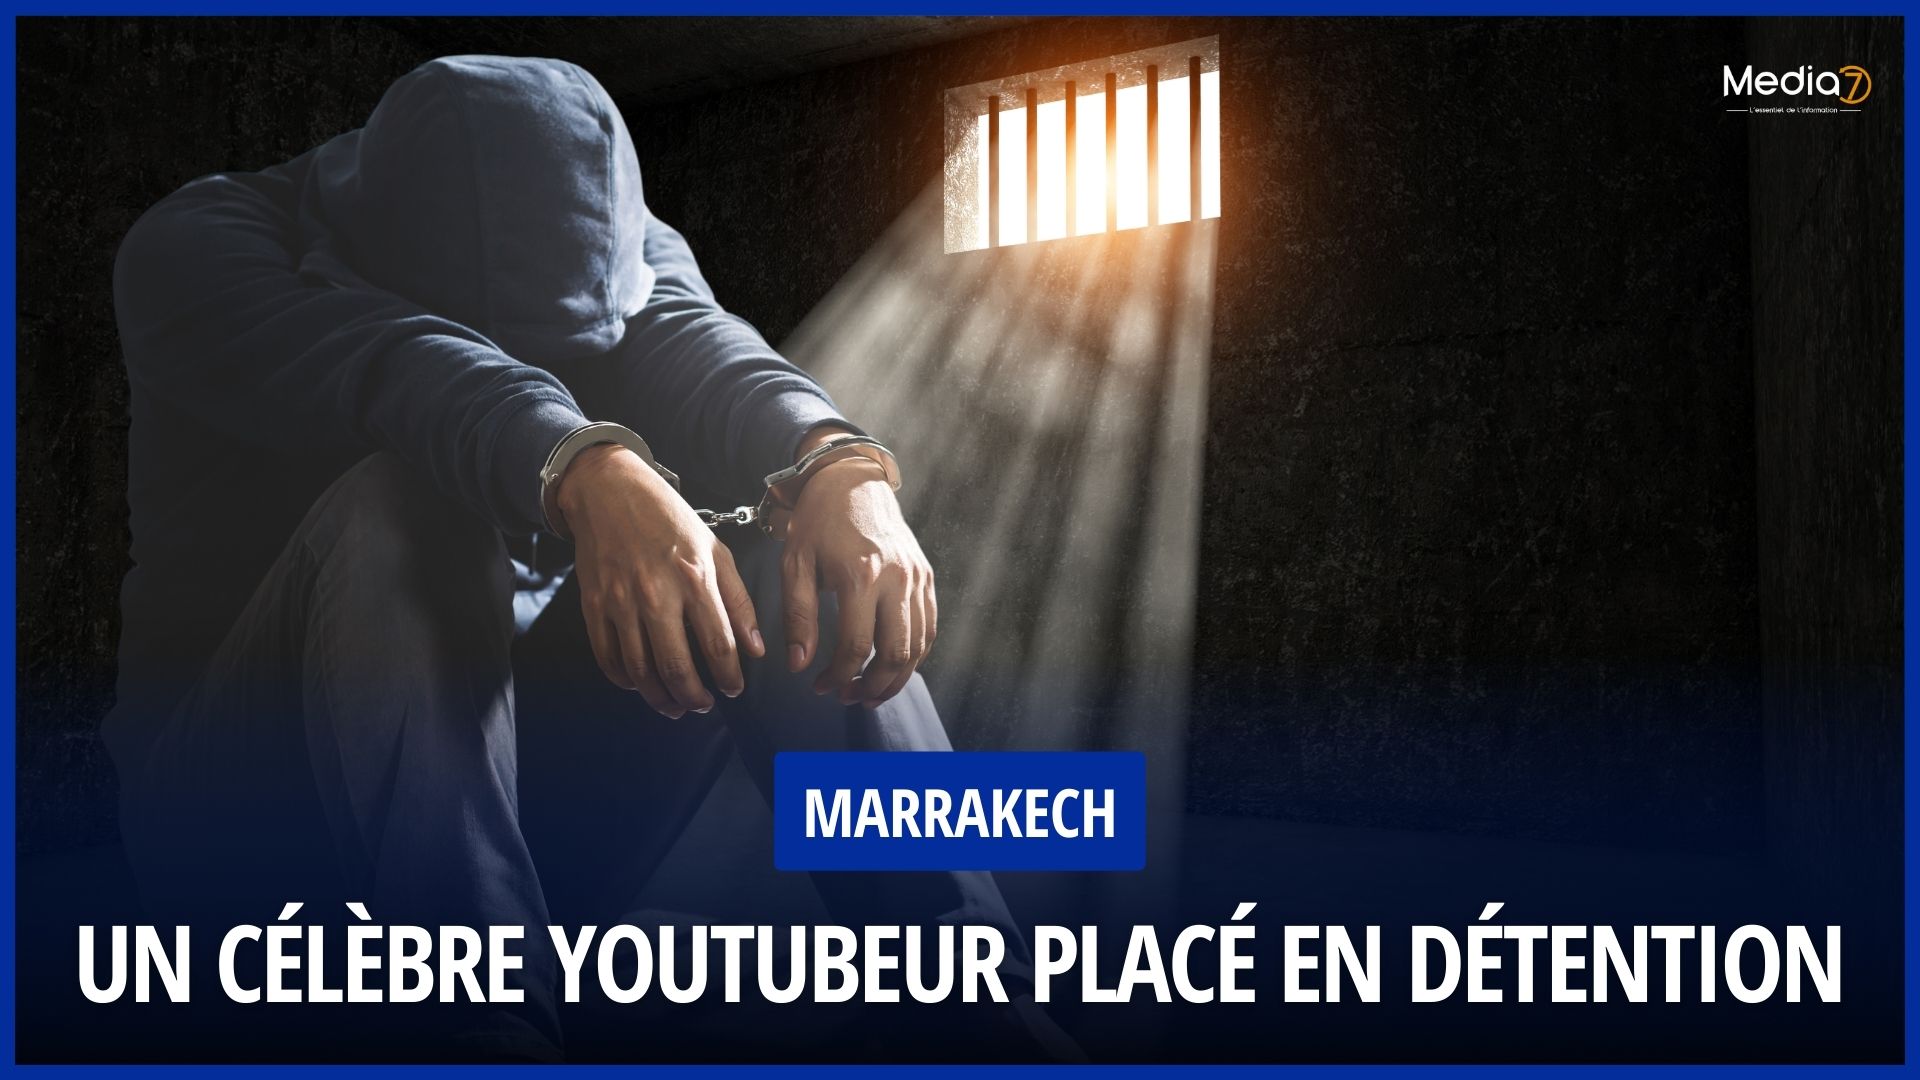 Marrakech: A Famous Youtuber Placed in Detention